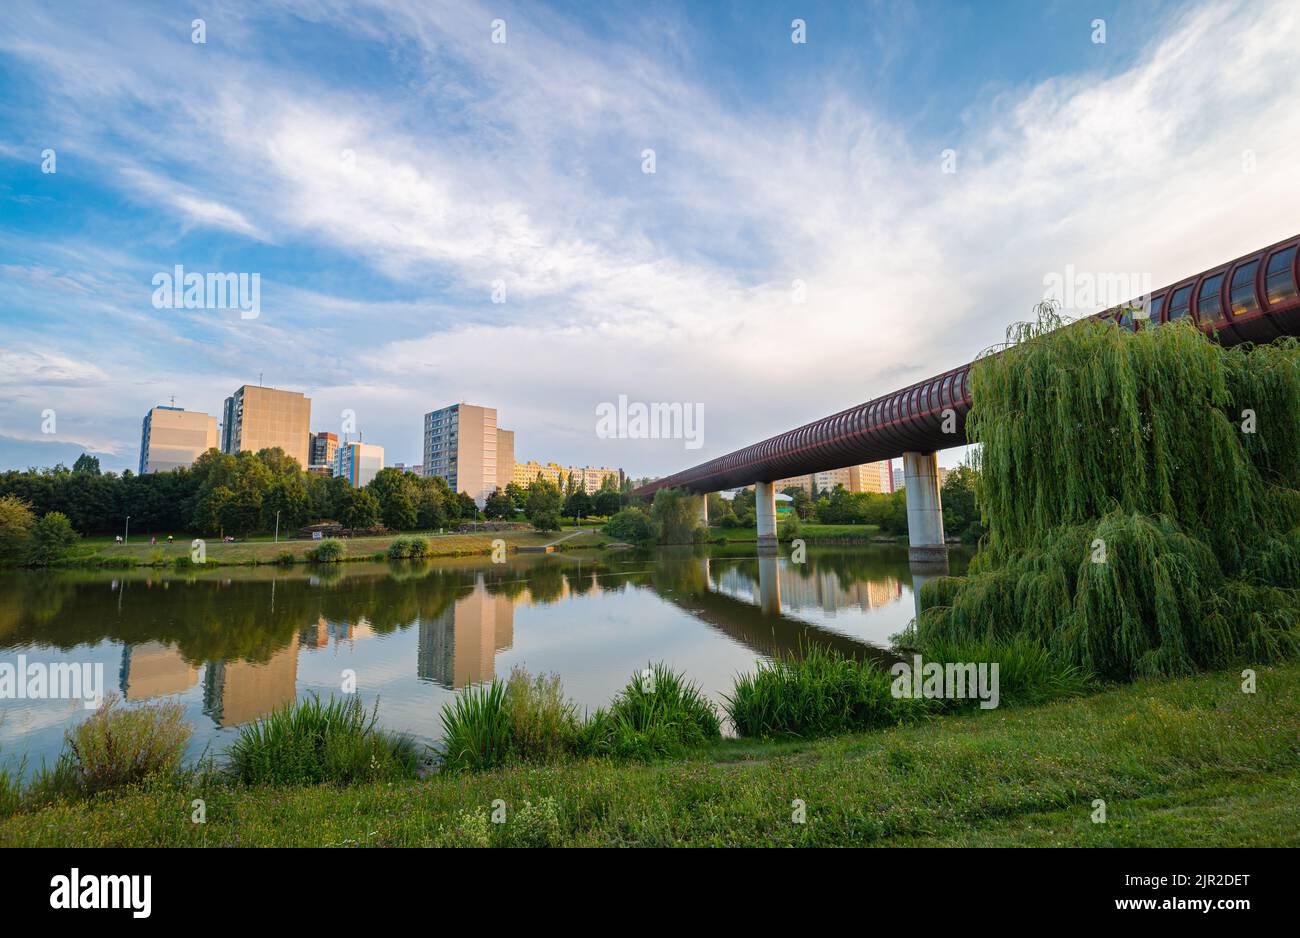 Scenic view of a city park in a suburban area of the city of Prague with Hůrka–Lužiny metro bridge over a lake in the park. Stock Photo